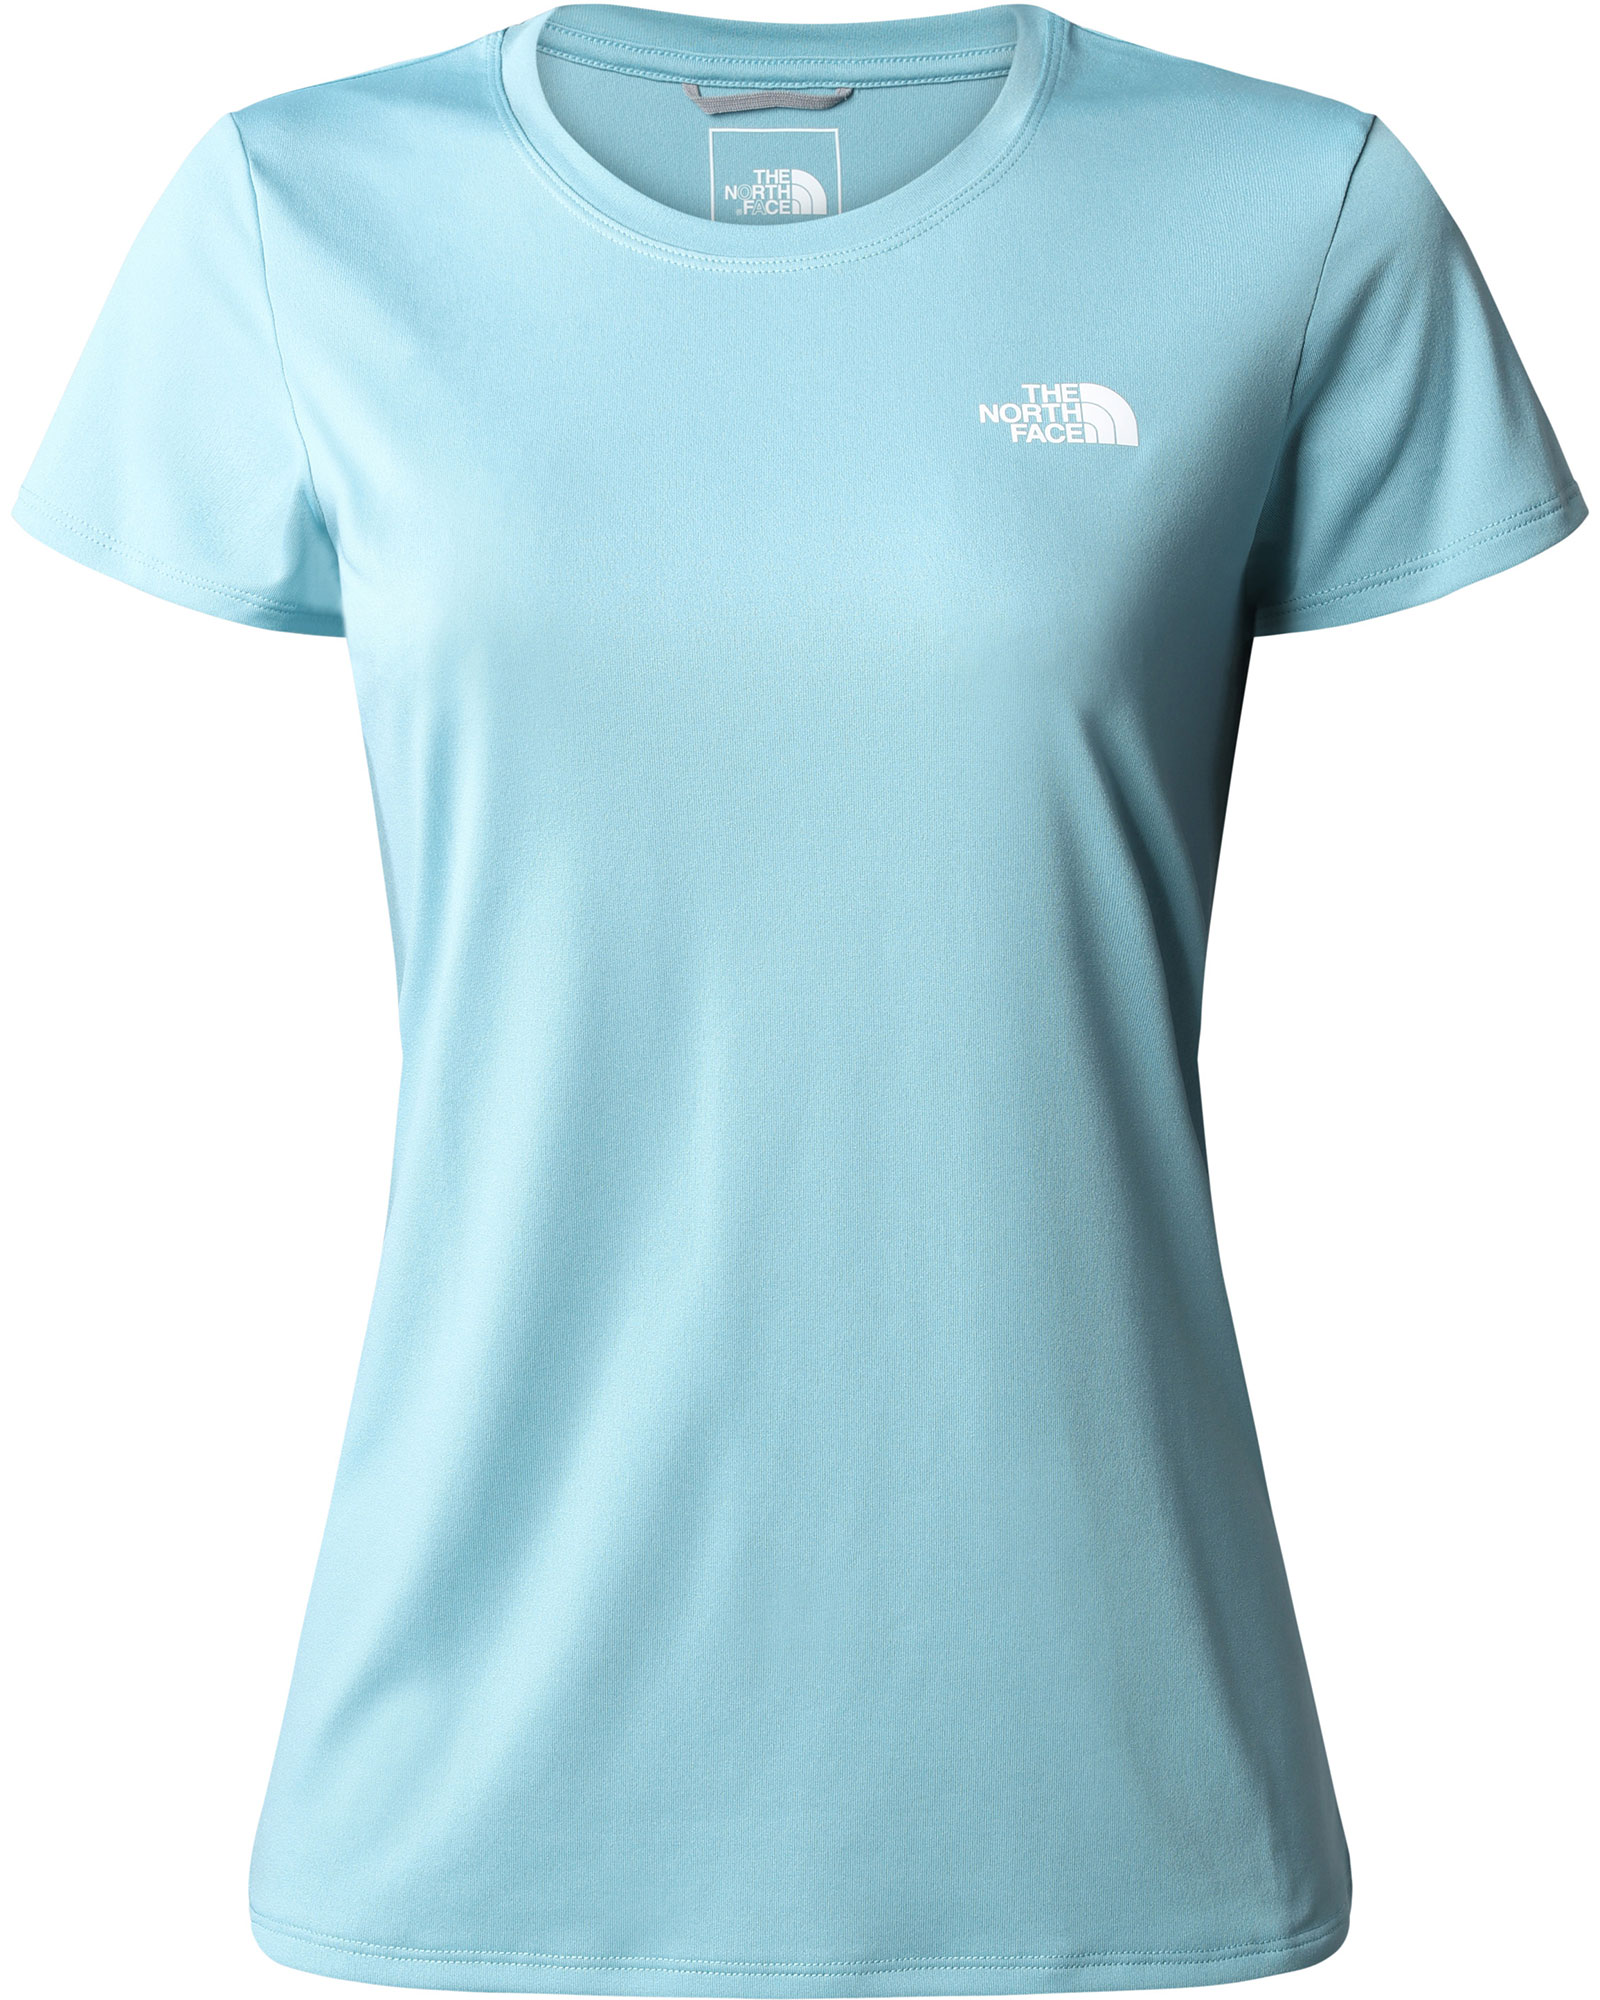 The North Face Reaxion Amp Women’s Crew T Shirt - Reef Waters XS